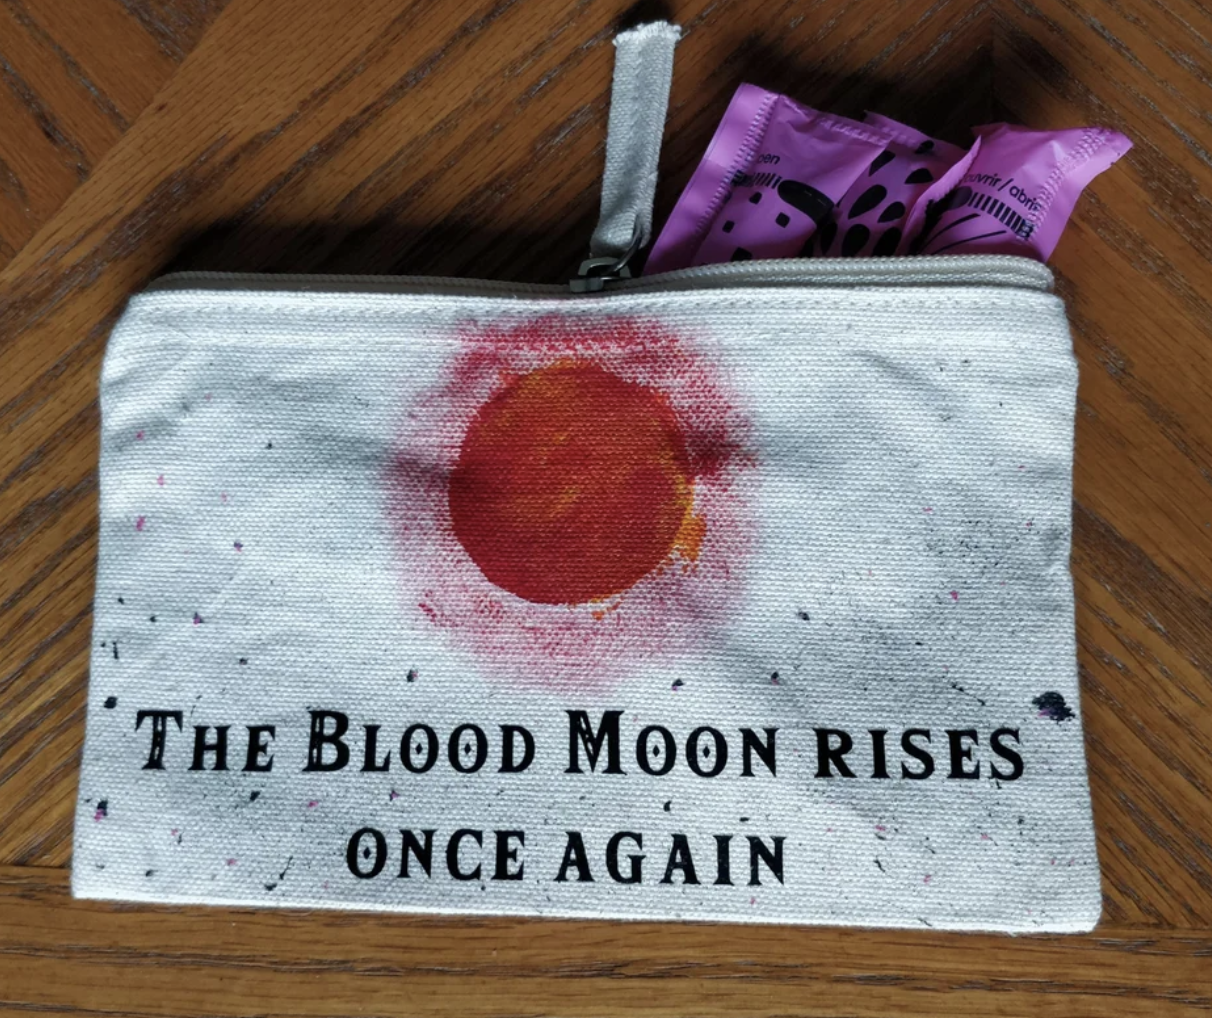 &quot;The blood moon rises once again&quot;